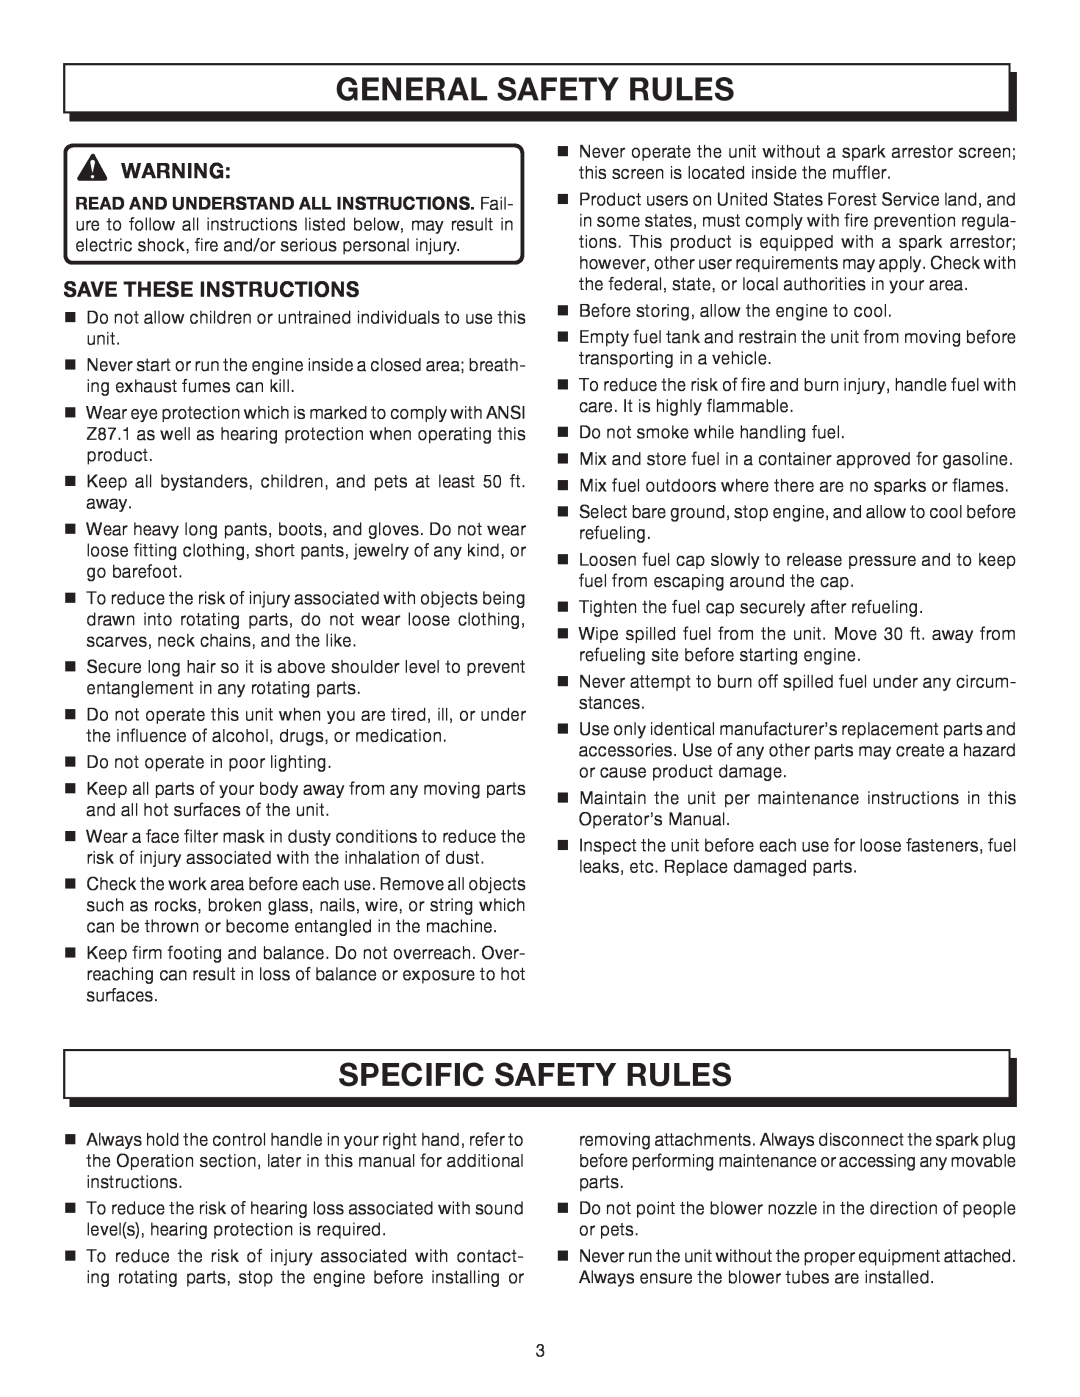 Homelite UT08012, UT08512 manual General Safety Rules, Specific Safety Rules, Save These Instructions 